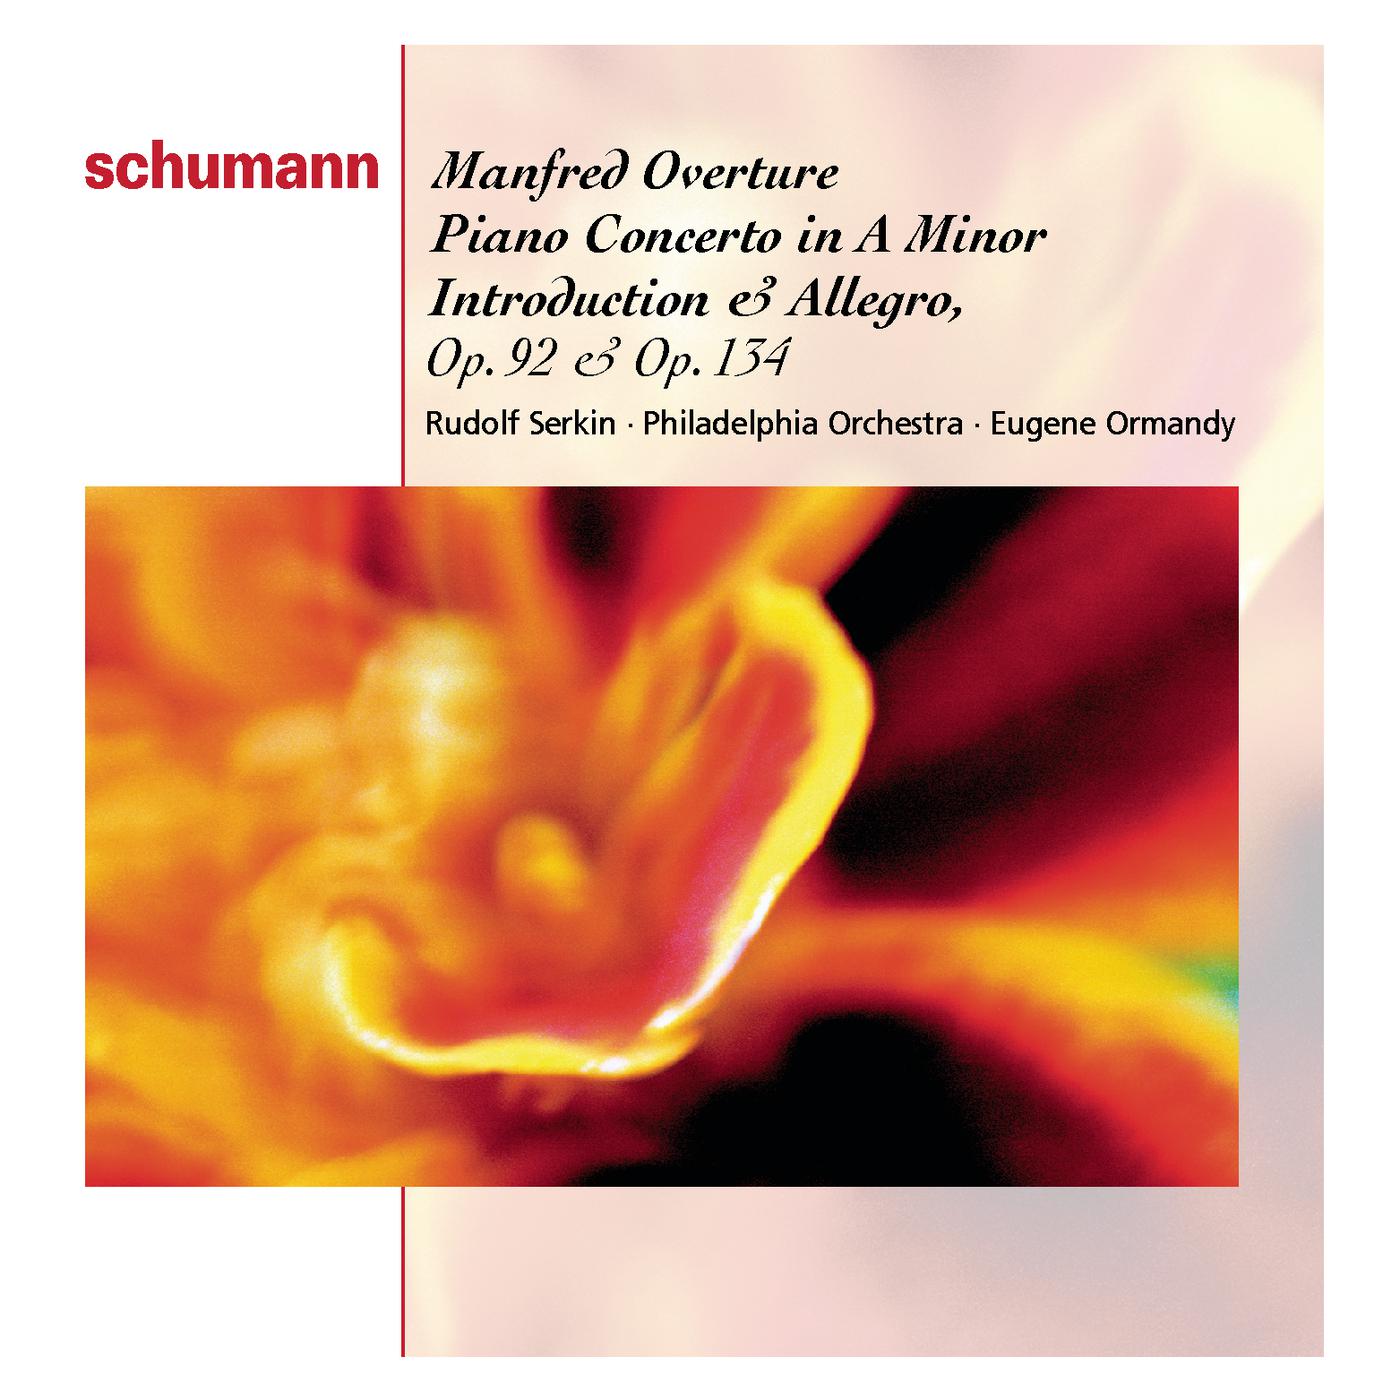 Schumann: Manfred Overture, Piano Concerto in A Minor & Other Works